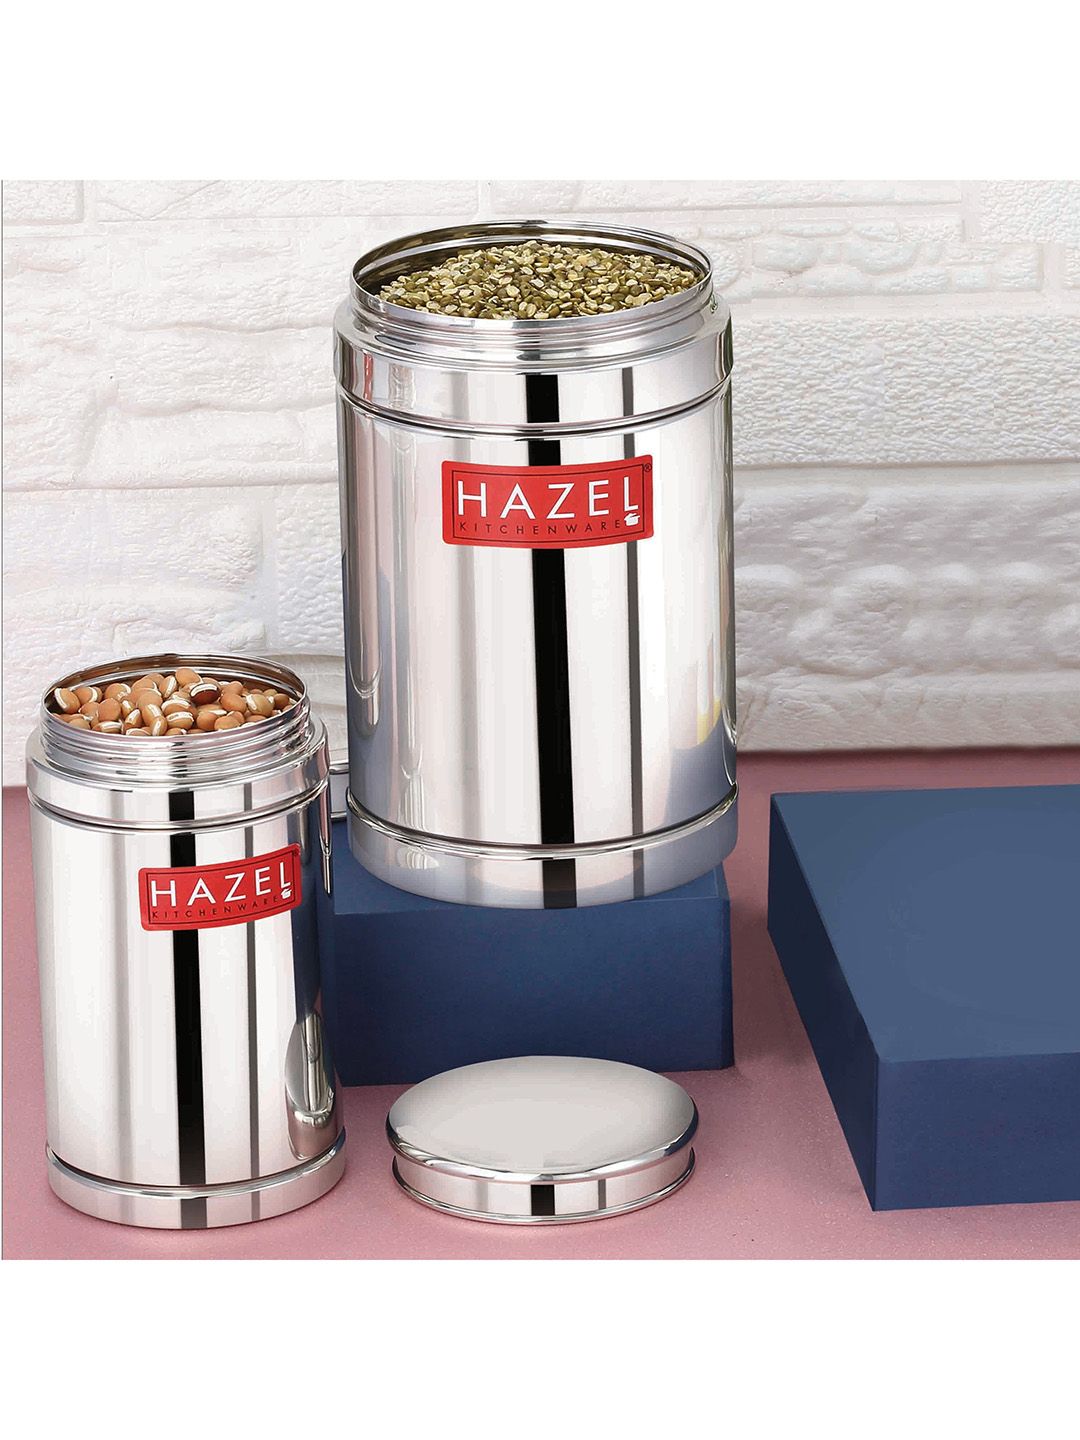 HAZEL Set of 2 Silver-Toned Stainless Steel Kitchen Containers Price in India